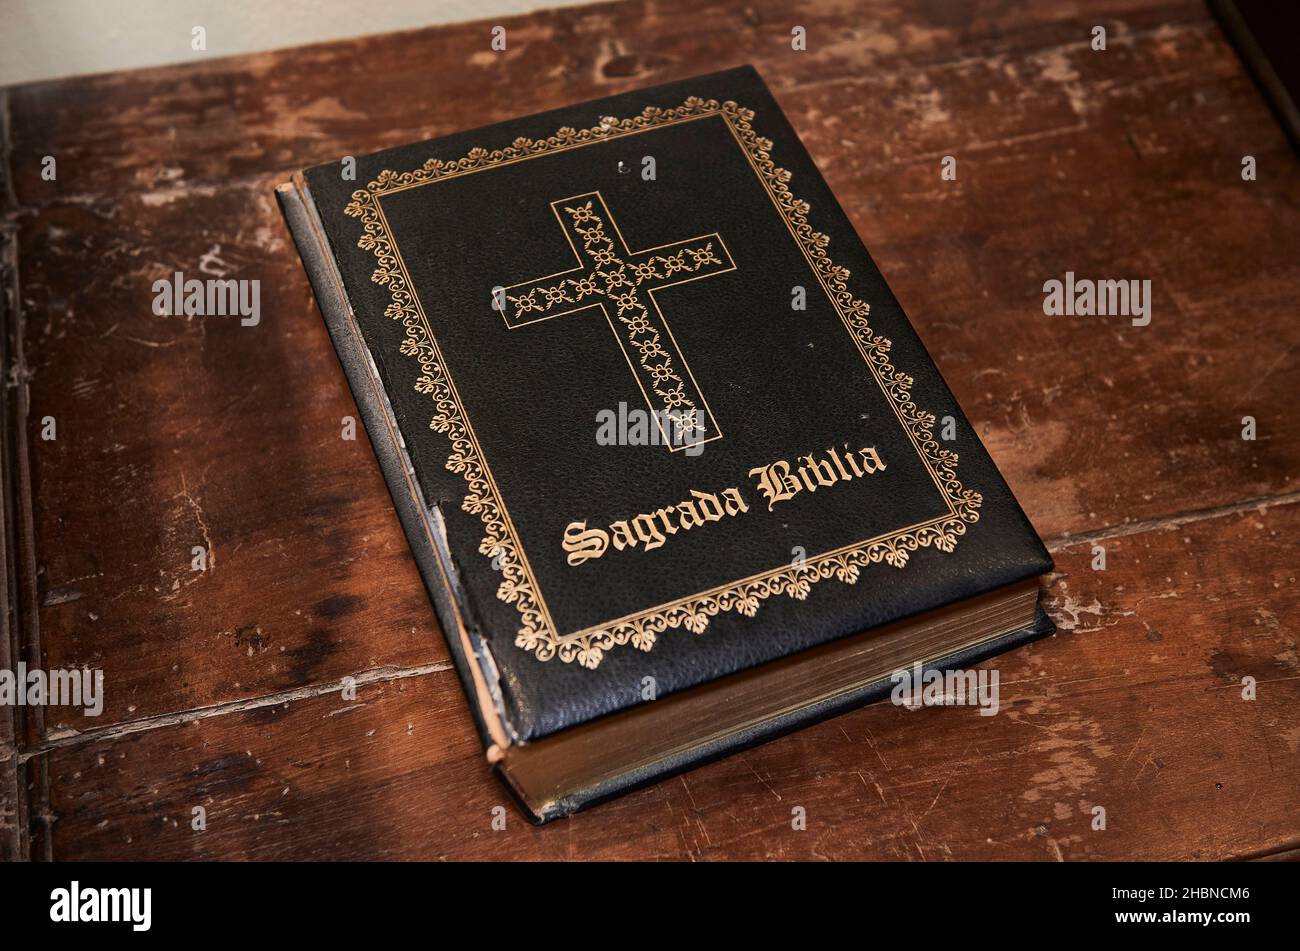 Much used book of the holy bible on wooden desk Stock Photo